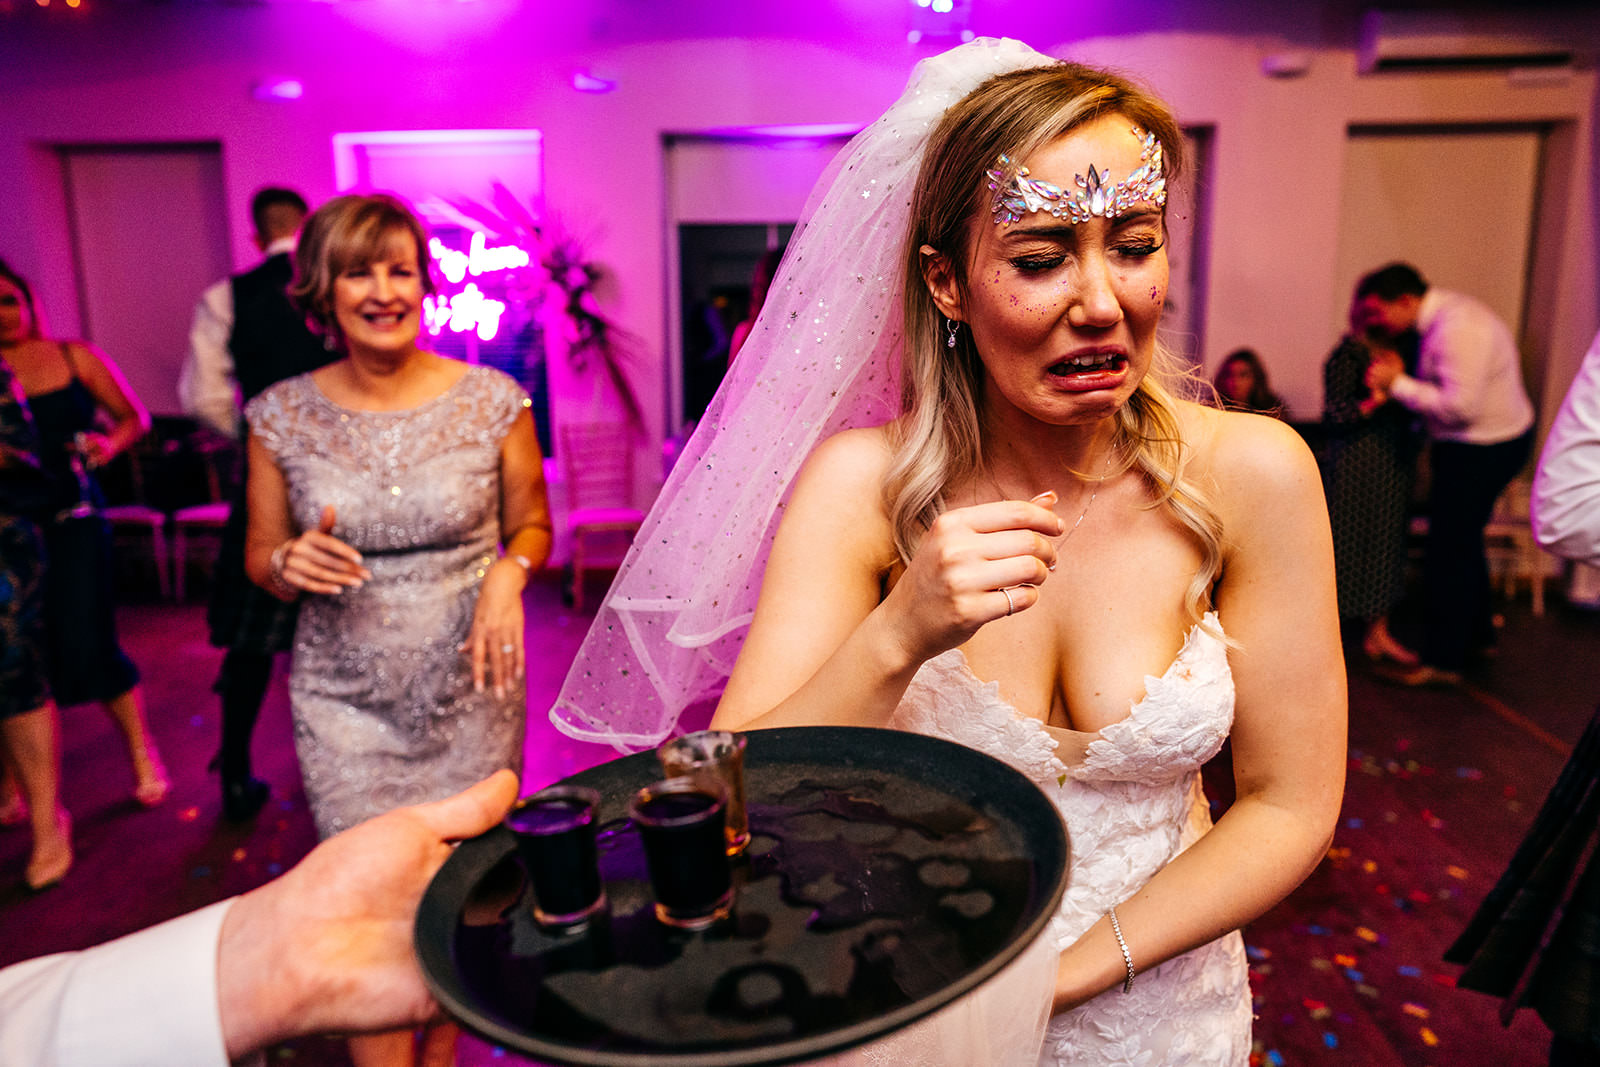 Bride does a shot pulls a funny disgusted face 